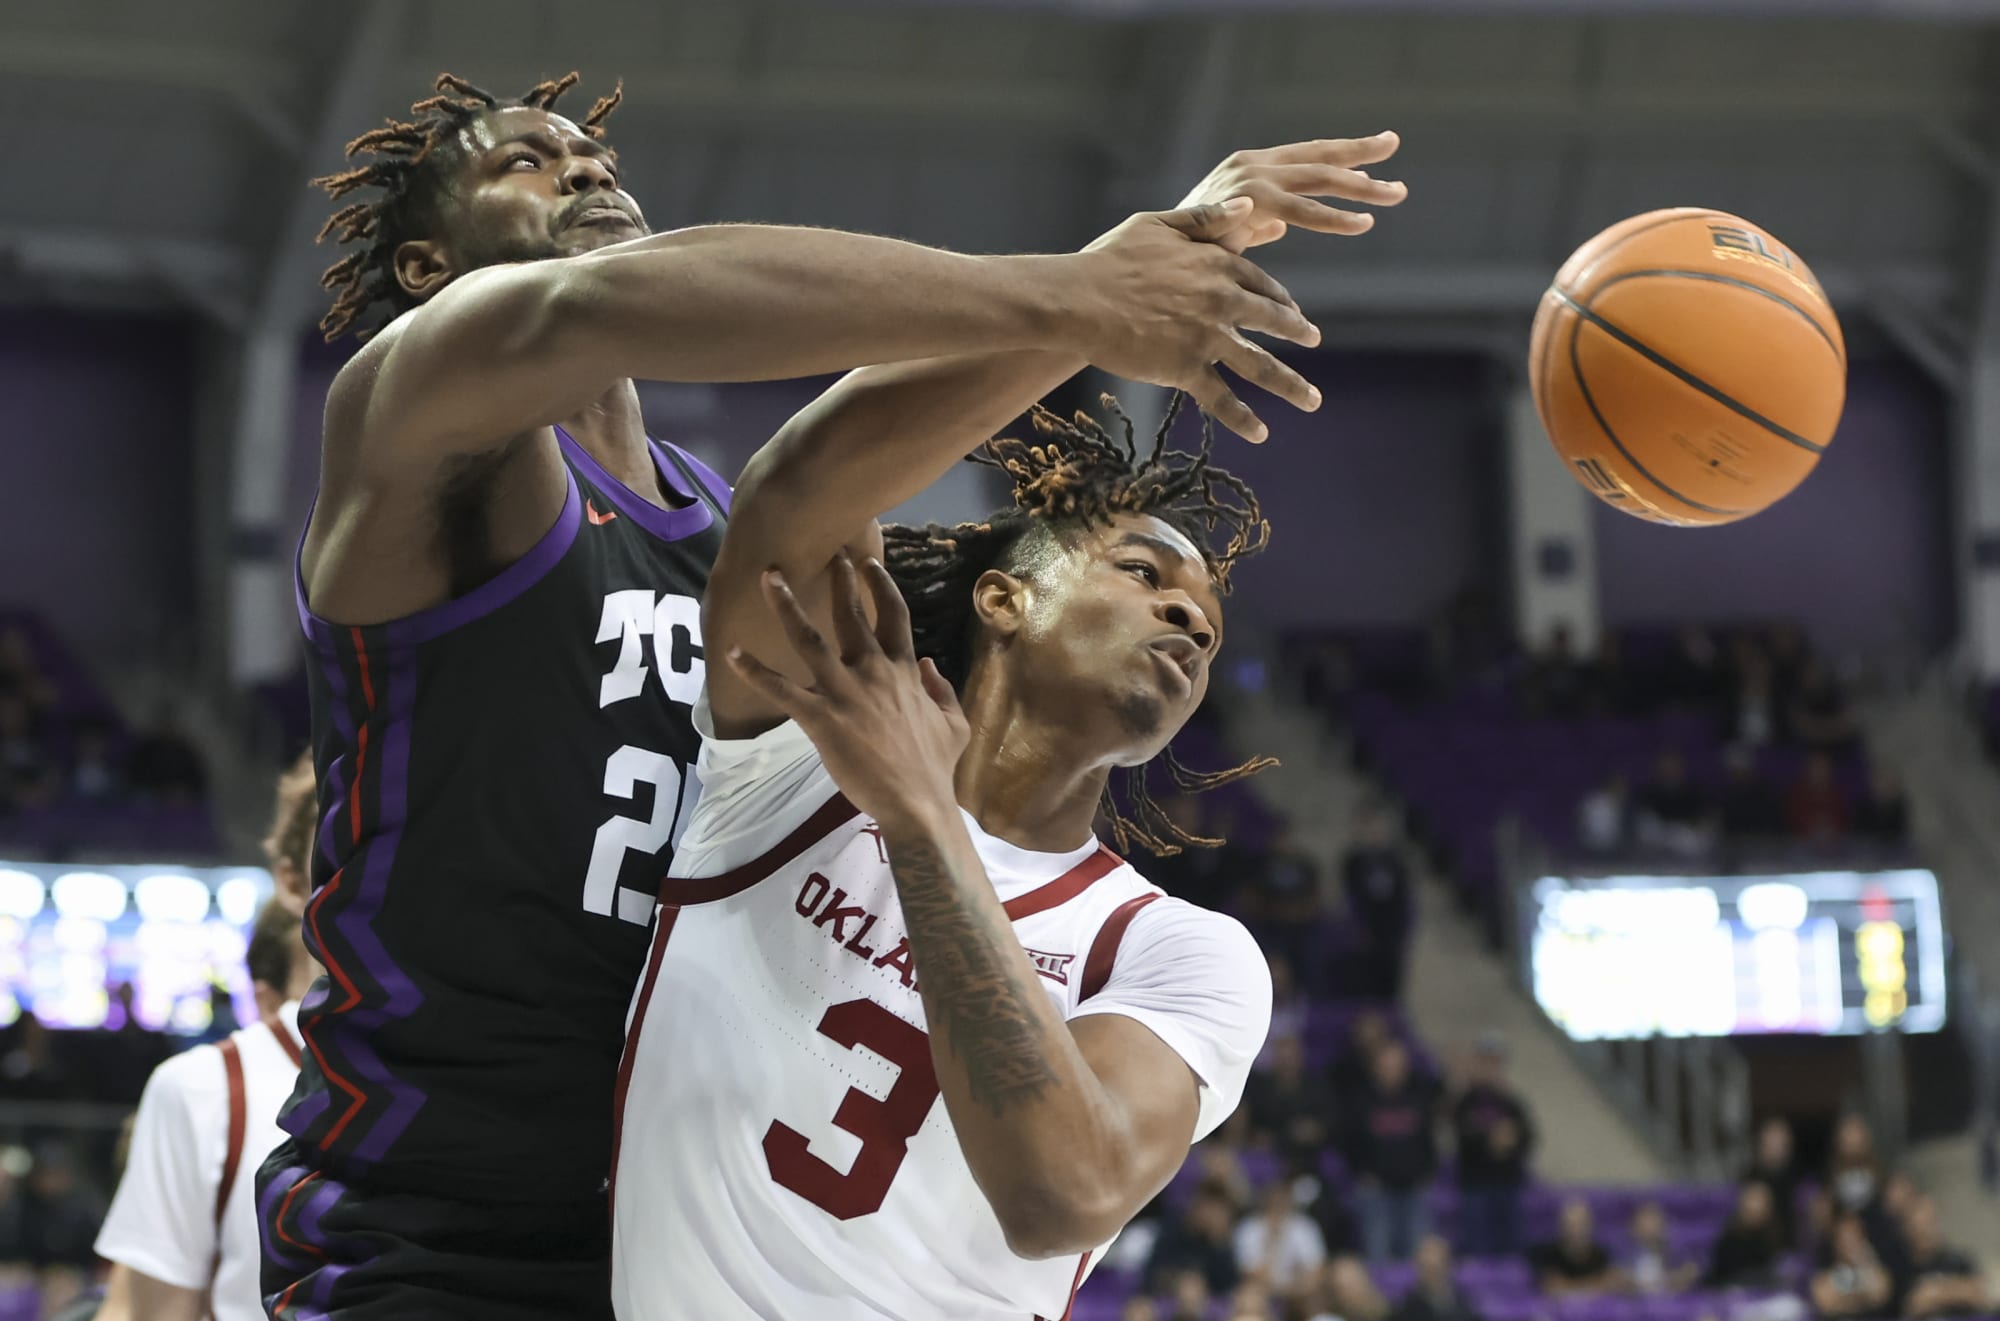 Oklahoma basketball: This one not close; Sooners lose by 27 to TCU